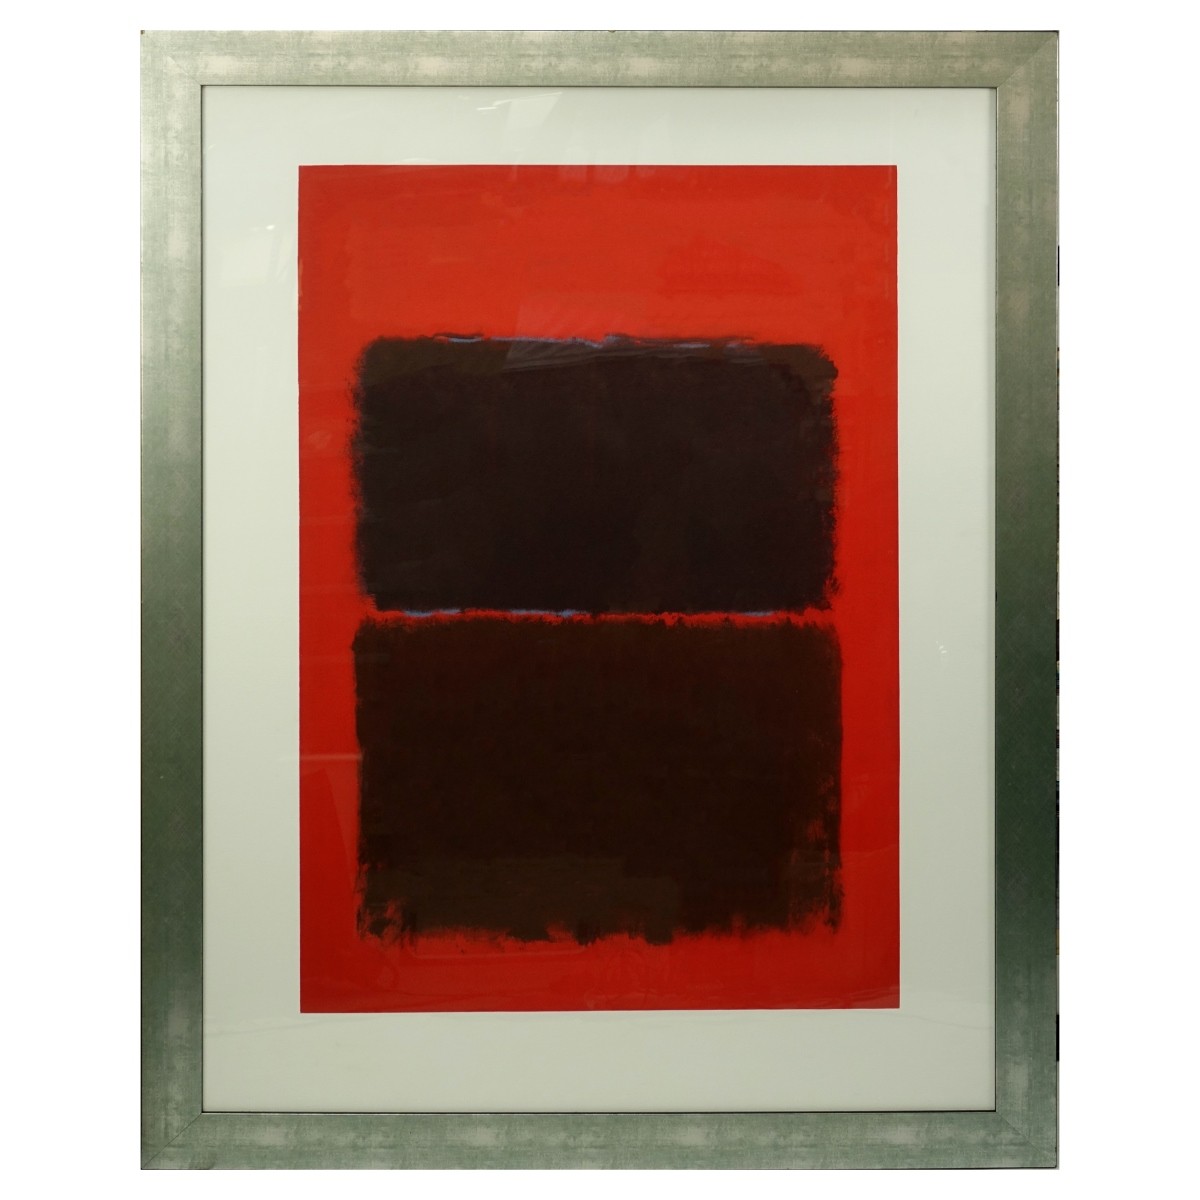 After: Mark Rothko (1903 - 1970) Lithograph Print